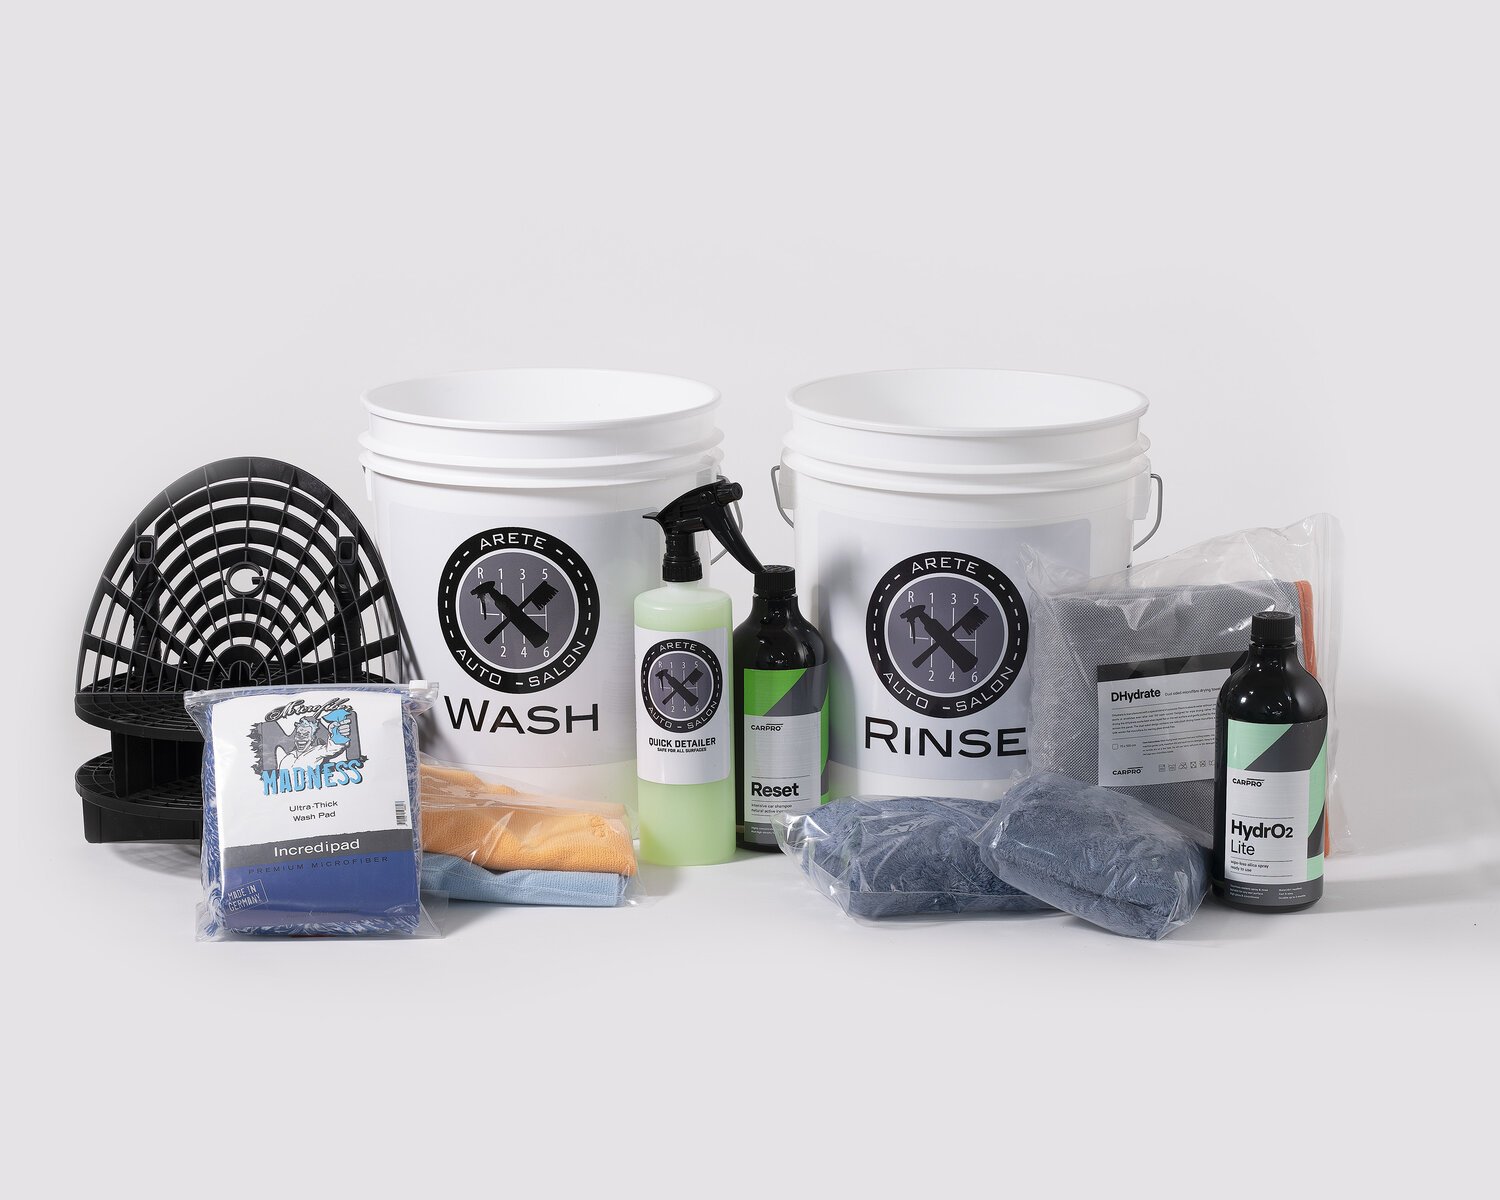 Car Wash Kit - Everything Needed To Wash Your Car from Start to Finish